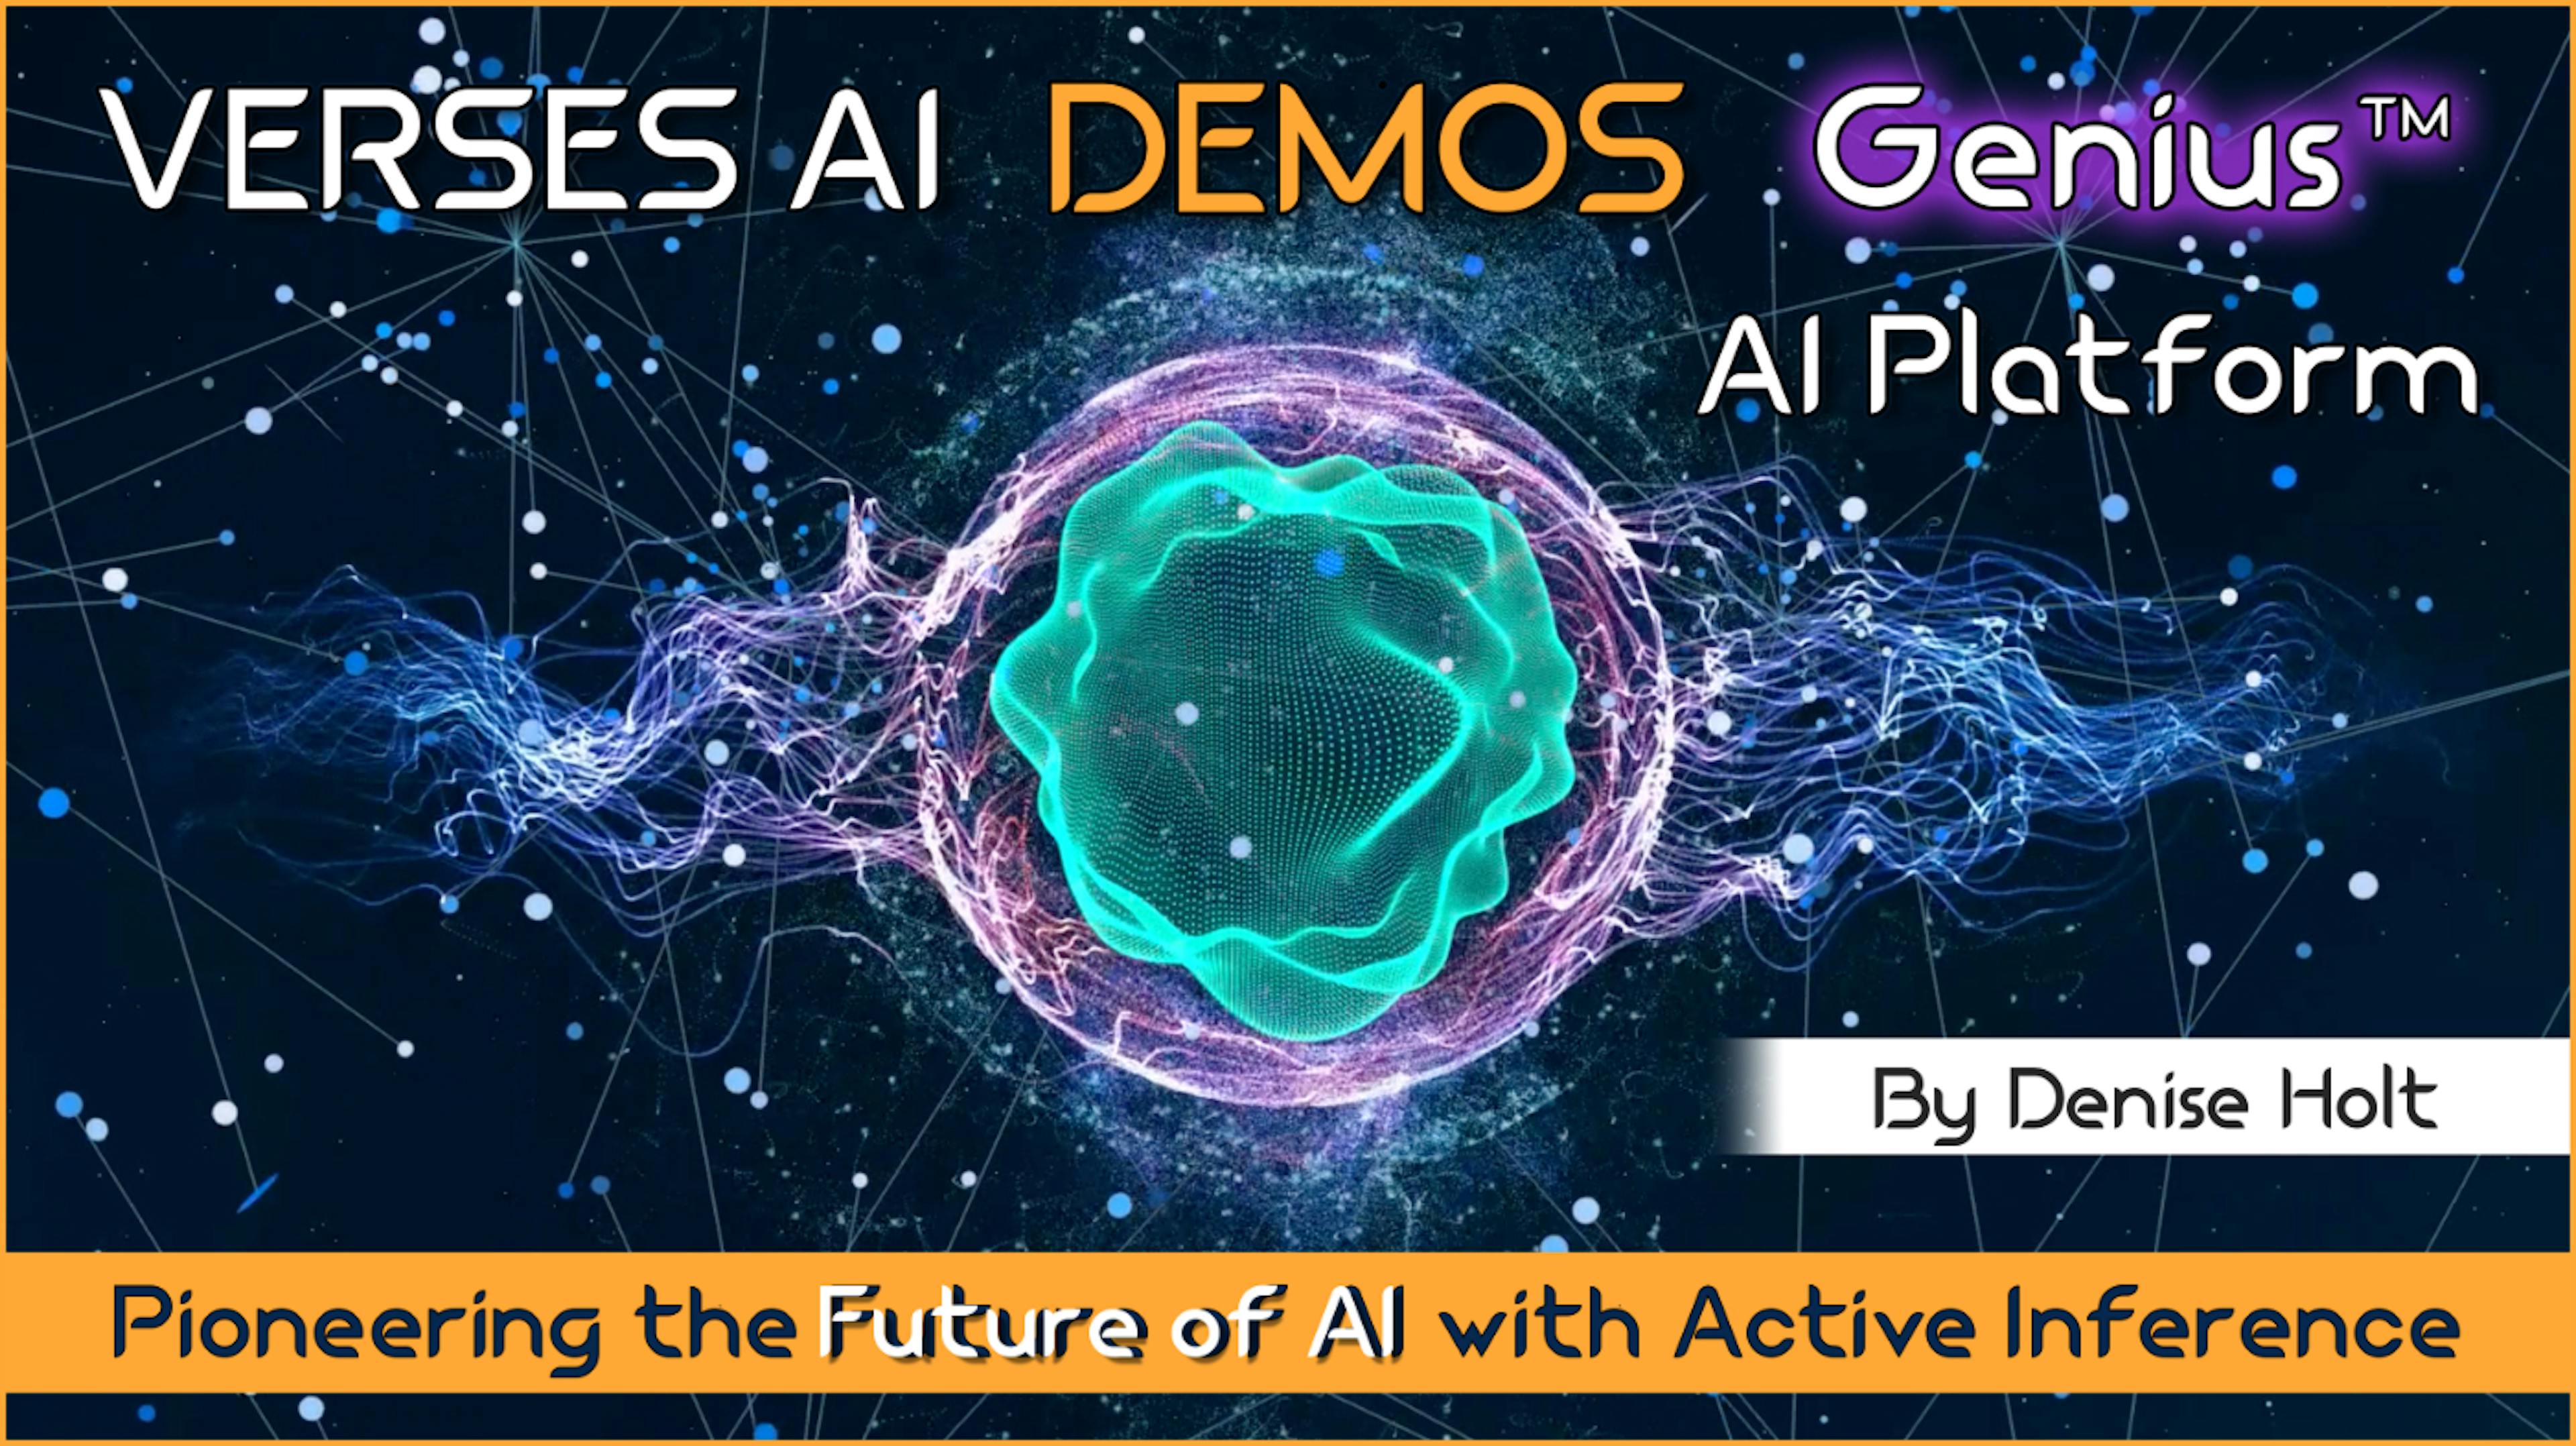 featured image - VERSES AI Demos ‘Genius™’: Pioneering the Path to Smarter AI